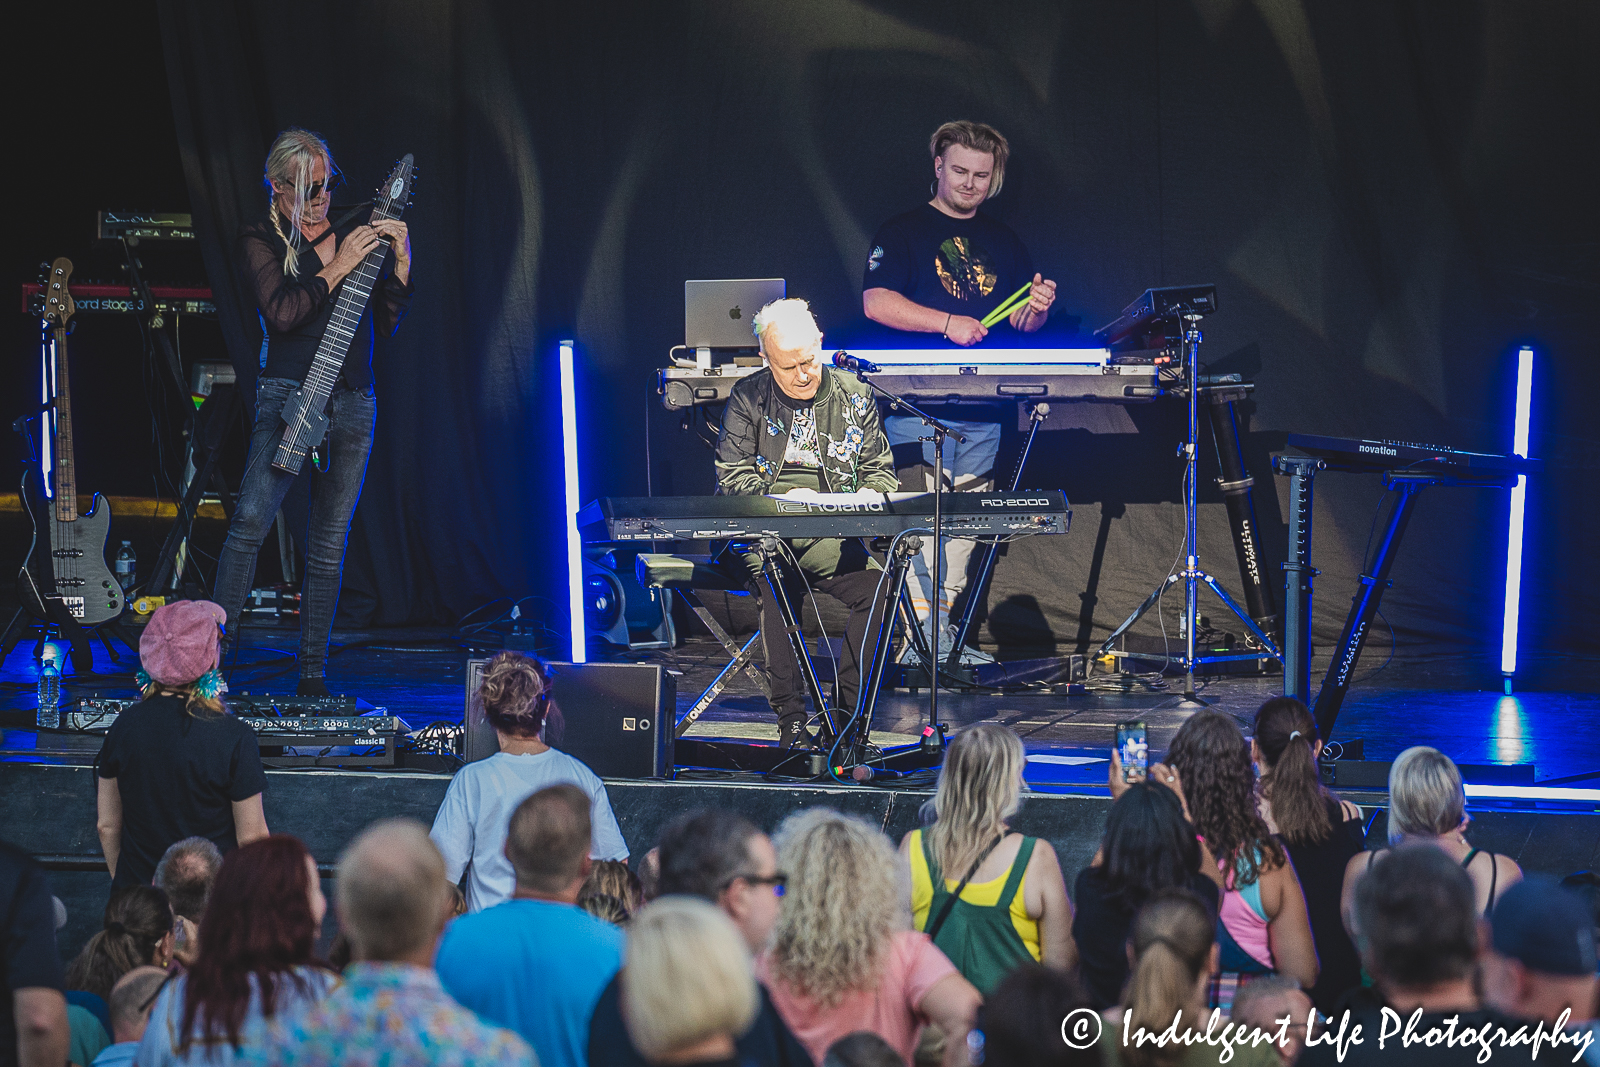 Howard Jones playing "Everlasting Love" on the keyboard live in concert with Dan Clarke alongside and Nick Beggs of Kajagoogoo on bass guitar at Starlight Theatre in Kansas City, MO on August 8, 2023.